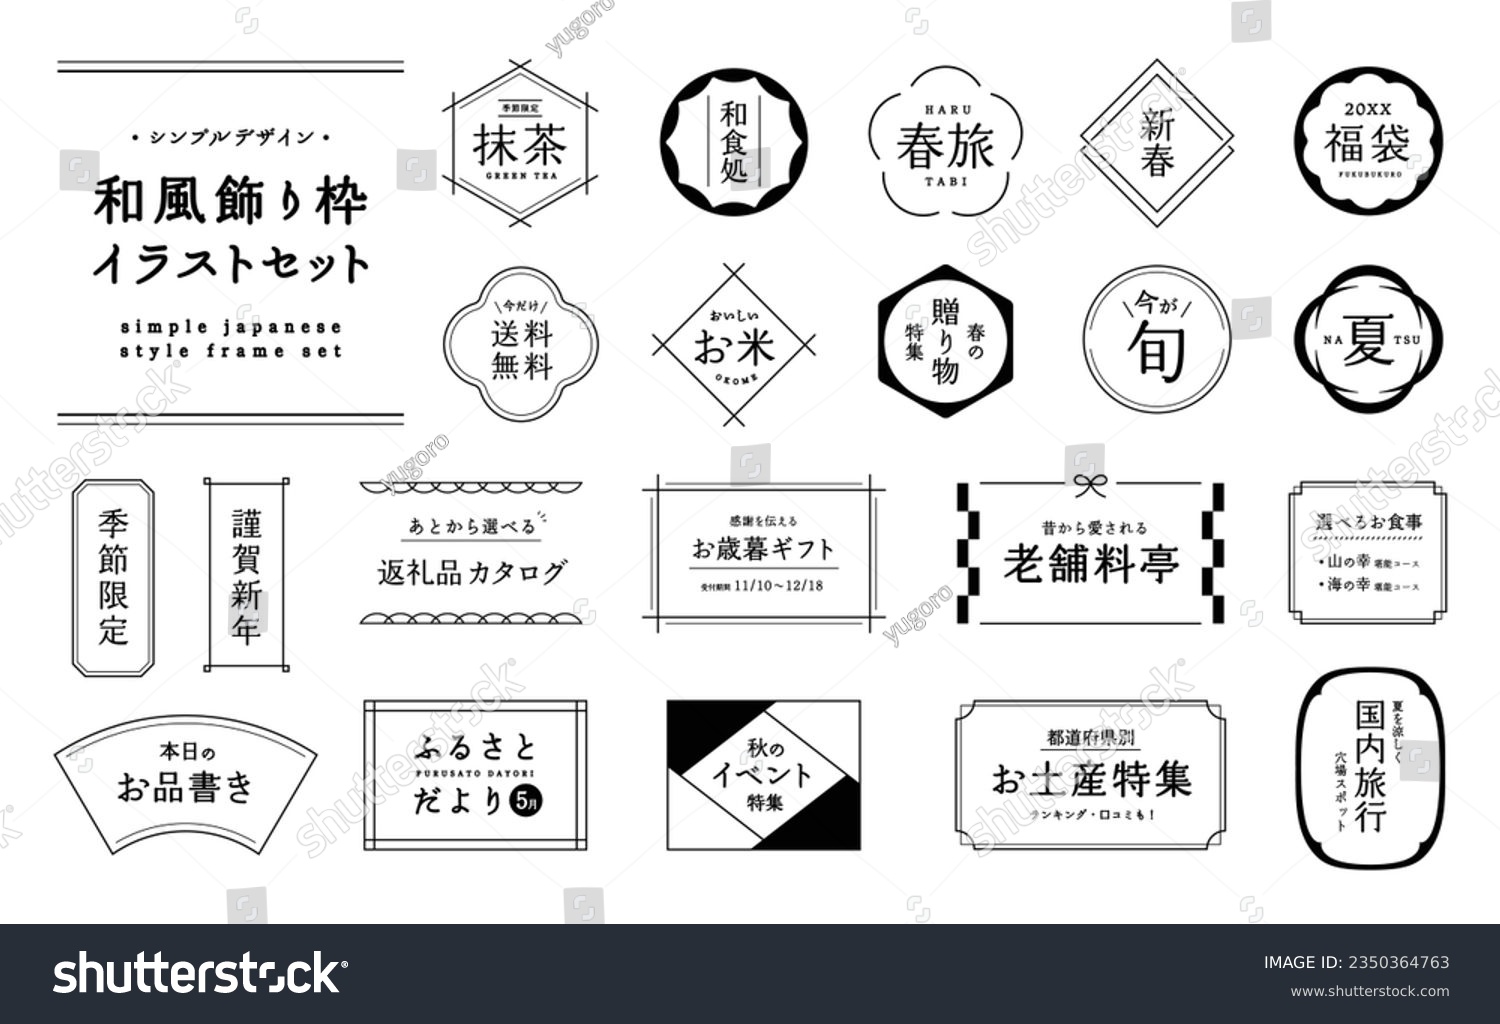 A set of simple Japanese style frames.
All Japanese in illustration is sample text.
It can be used for Japanese New Year's Day, New Year's card title decoration, etc. #2350364763